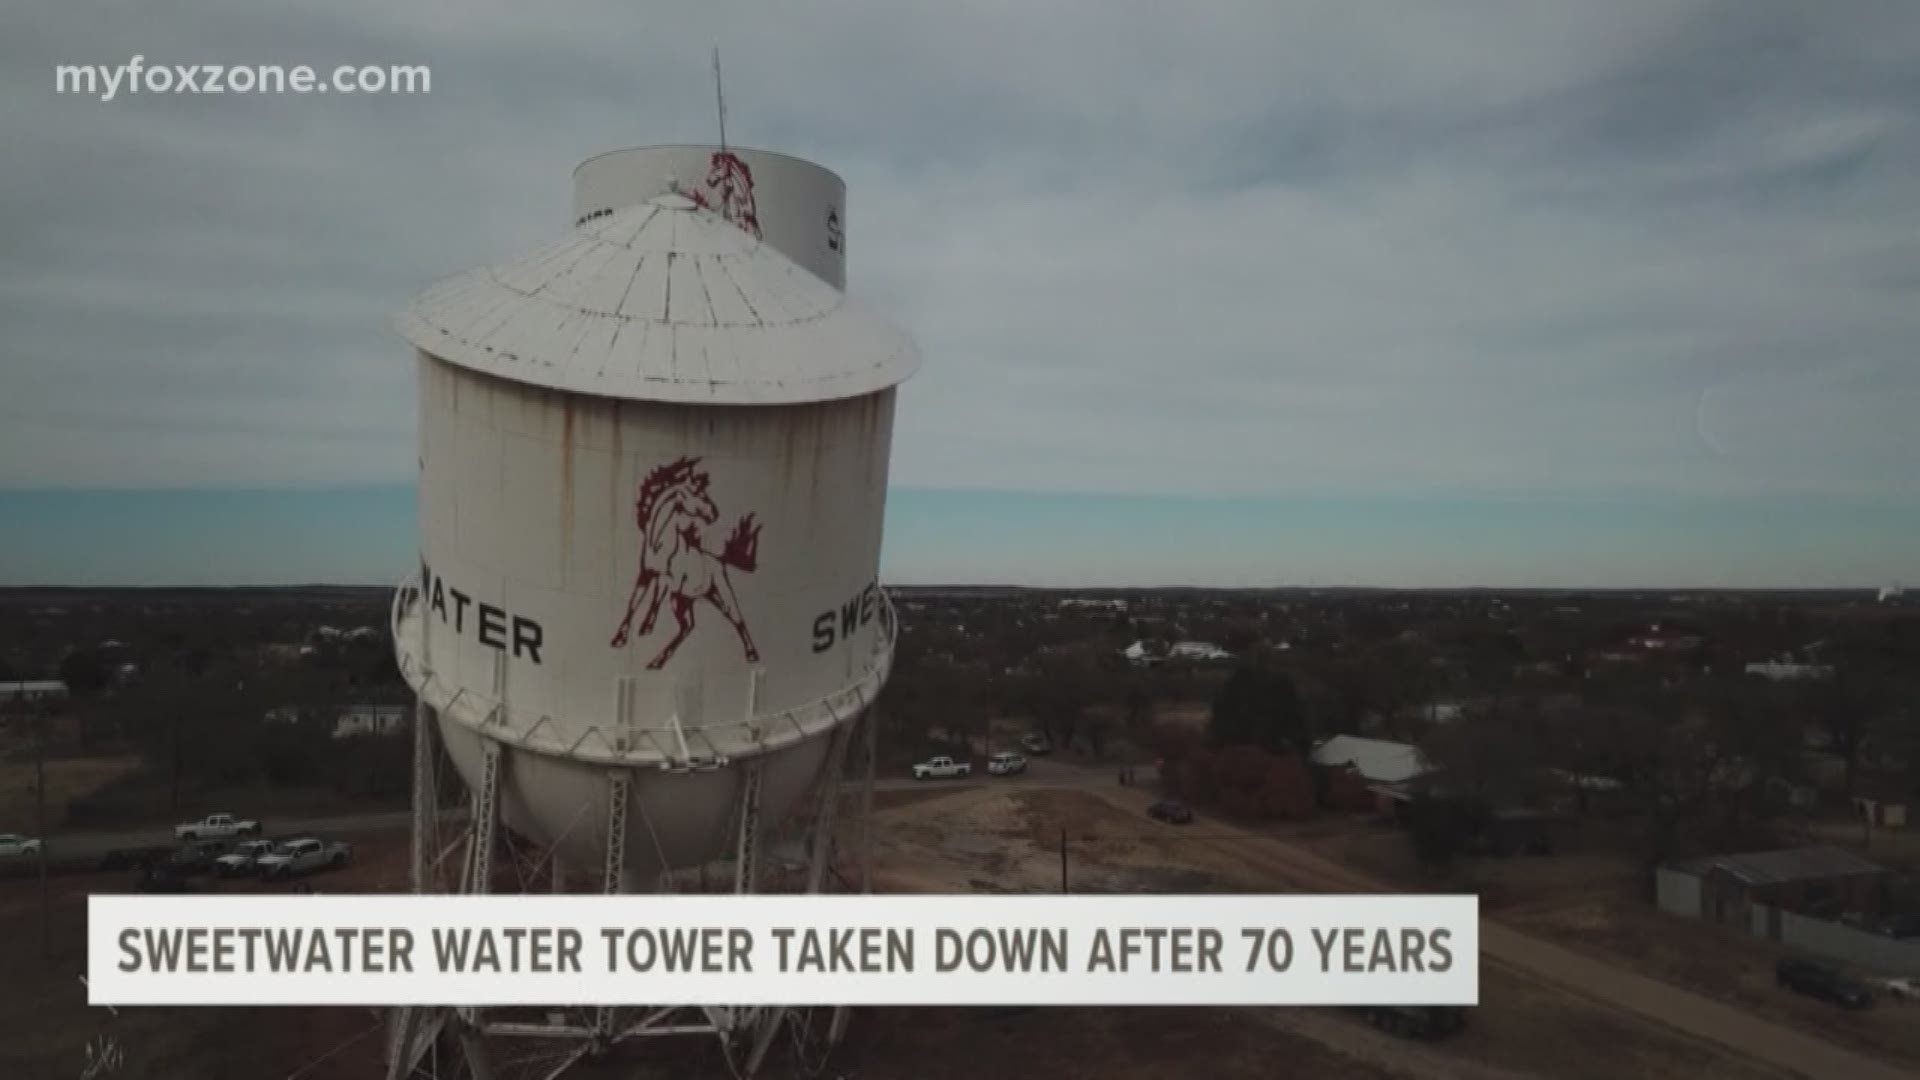 The Sweetwater water tower has been an icon for all to see on I-20